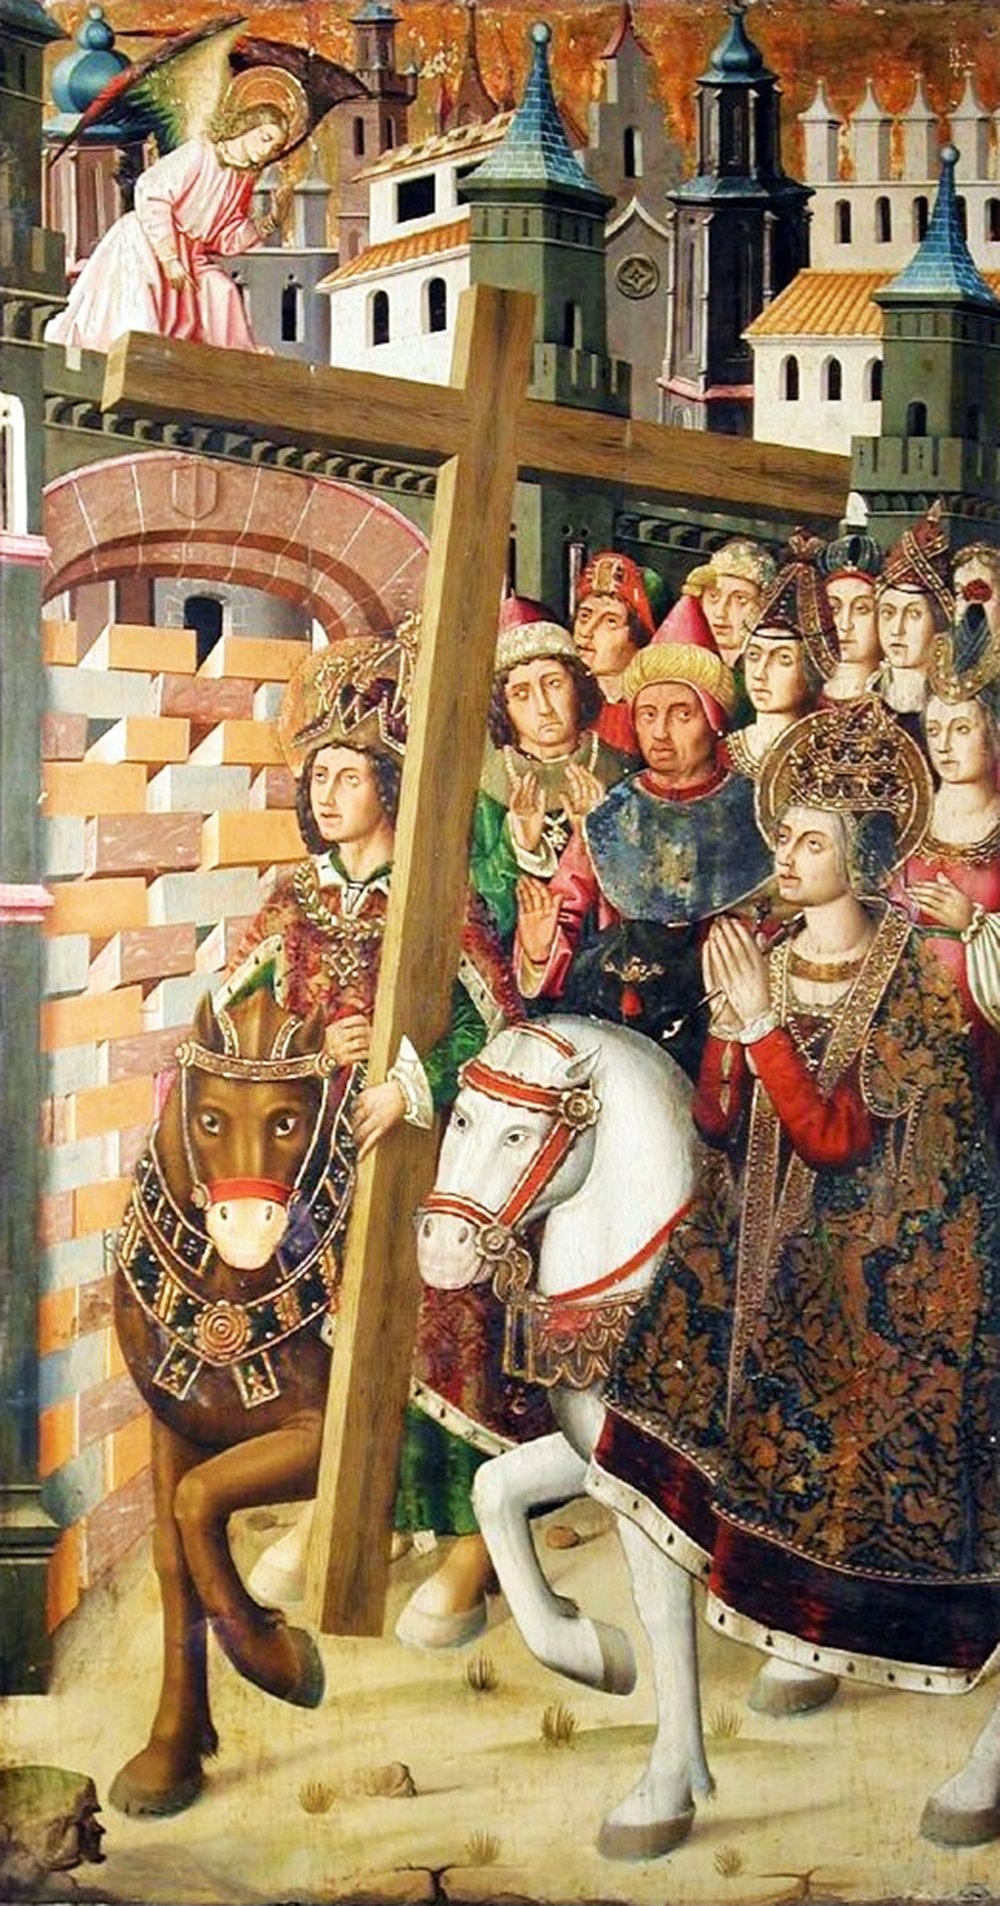 An intricate painting by Miguel Ximénez from 1483-7 depicting Saint Helena and Emperor Heraclius, adorned in royal garments, carrying the Holy Cross to Jerusalem. The scene showcases a richly detailed cityscape in the background with multicolored buildings and spires. An angel hovers above, guiding their way, while a group of nobles and clergy watches in reverence. Two majestic horses stand by their side, with one carrying the cross.